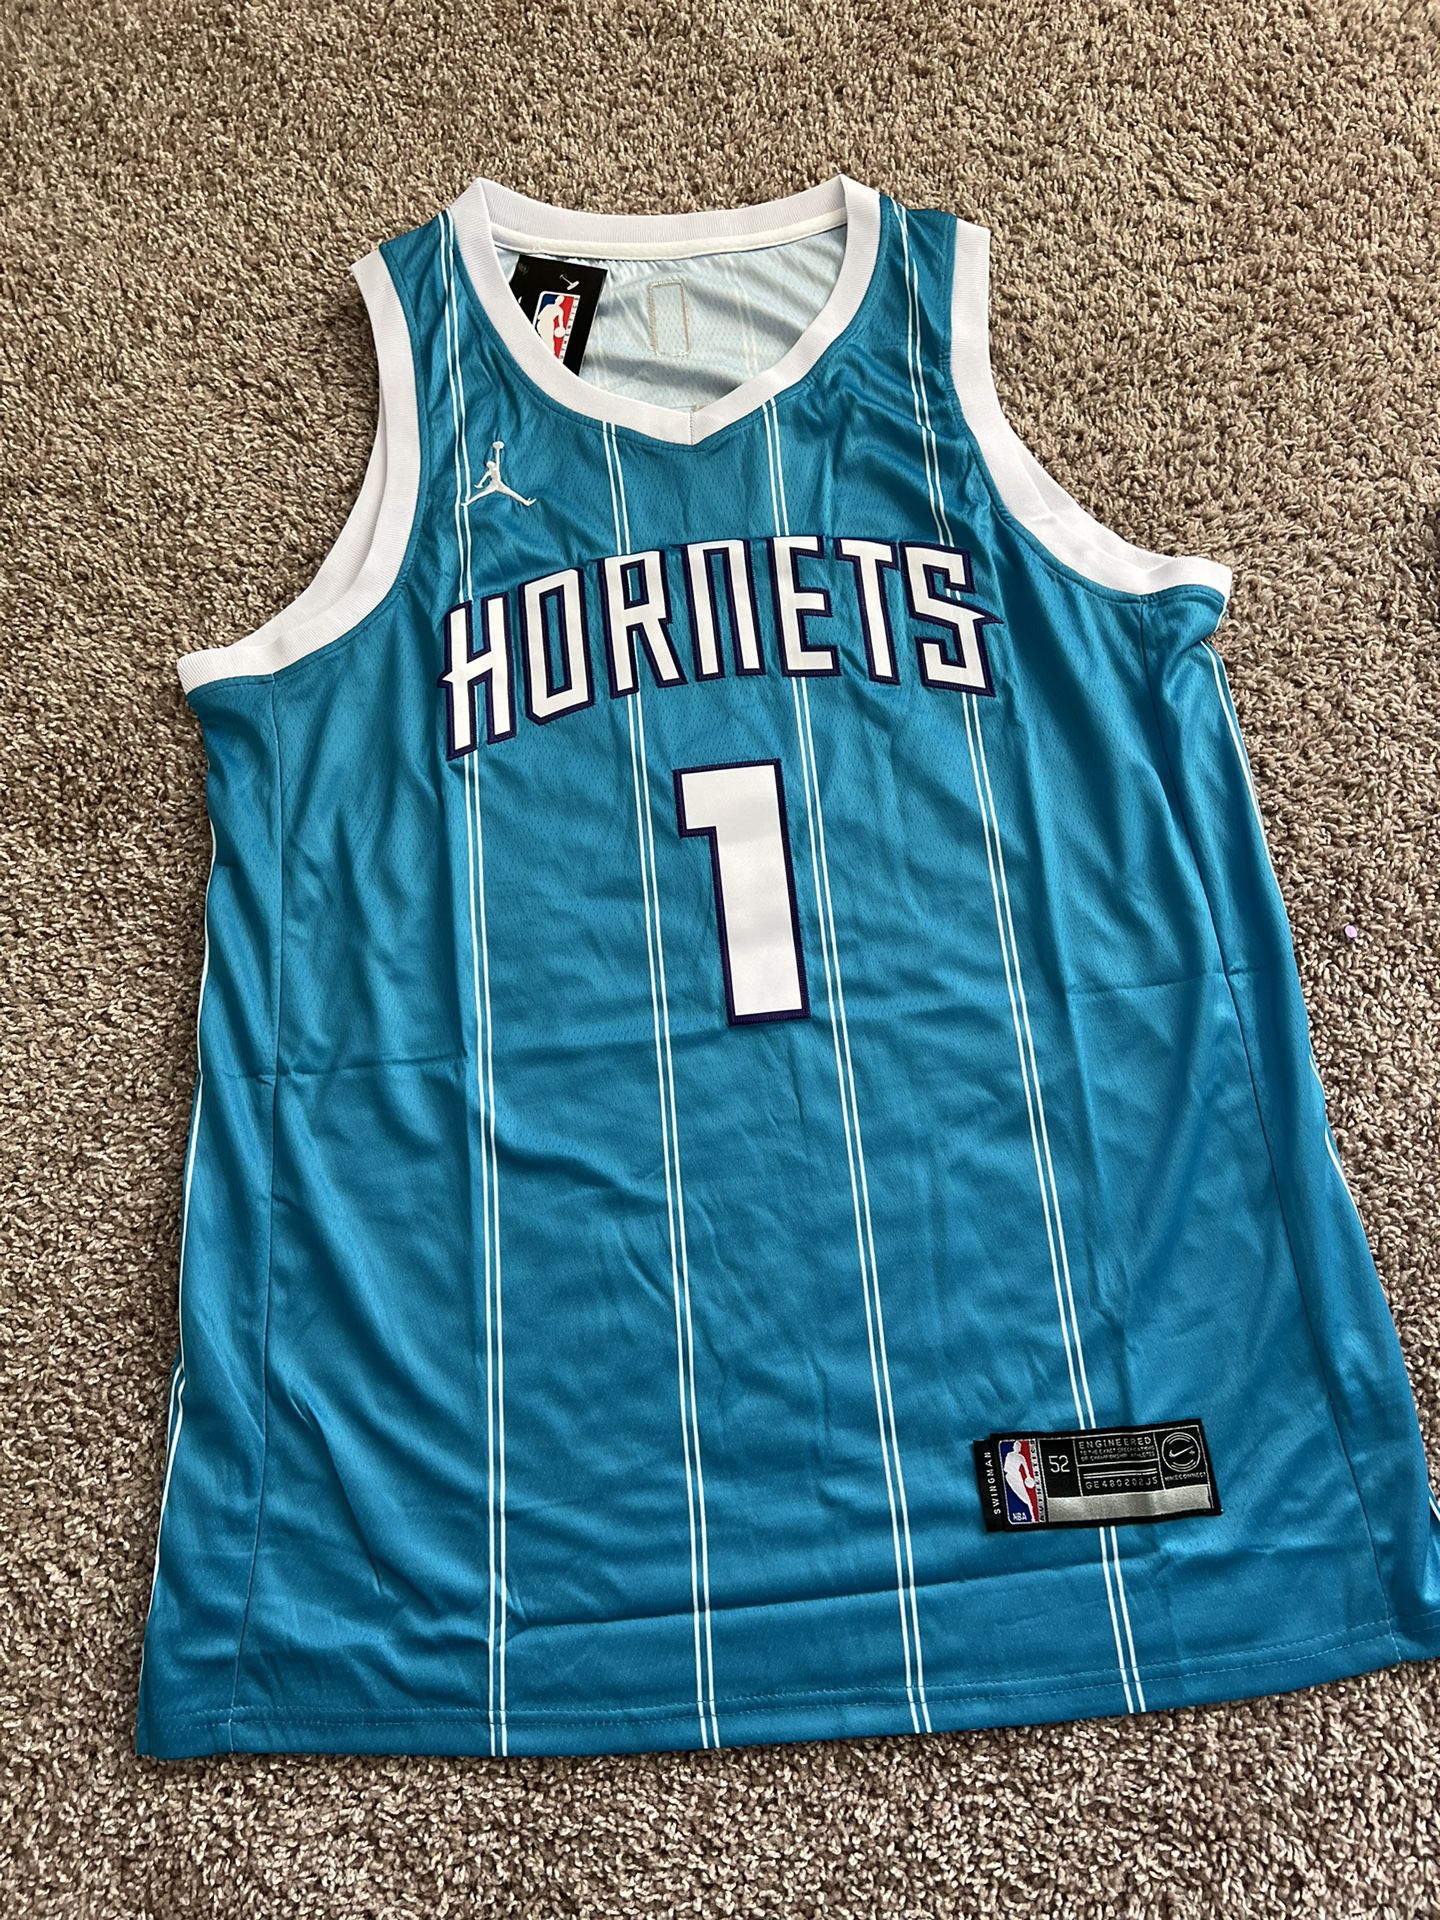 Lamelo Ball Charlotte Hornets Jersey Size XL for Sale in Kyle, TX - OfferUp